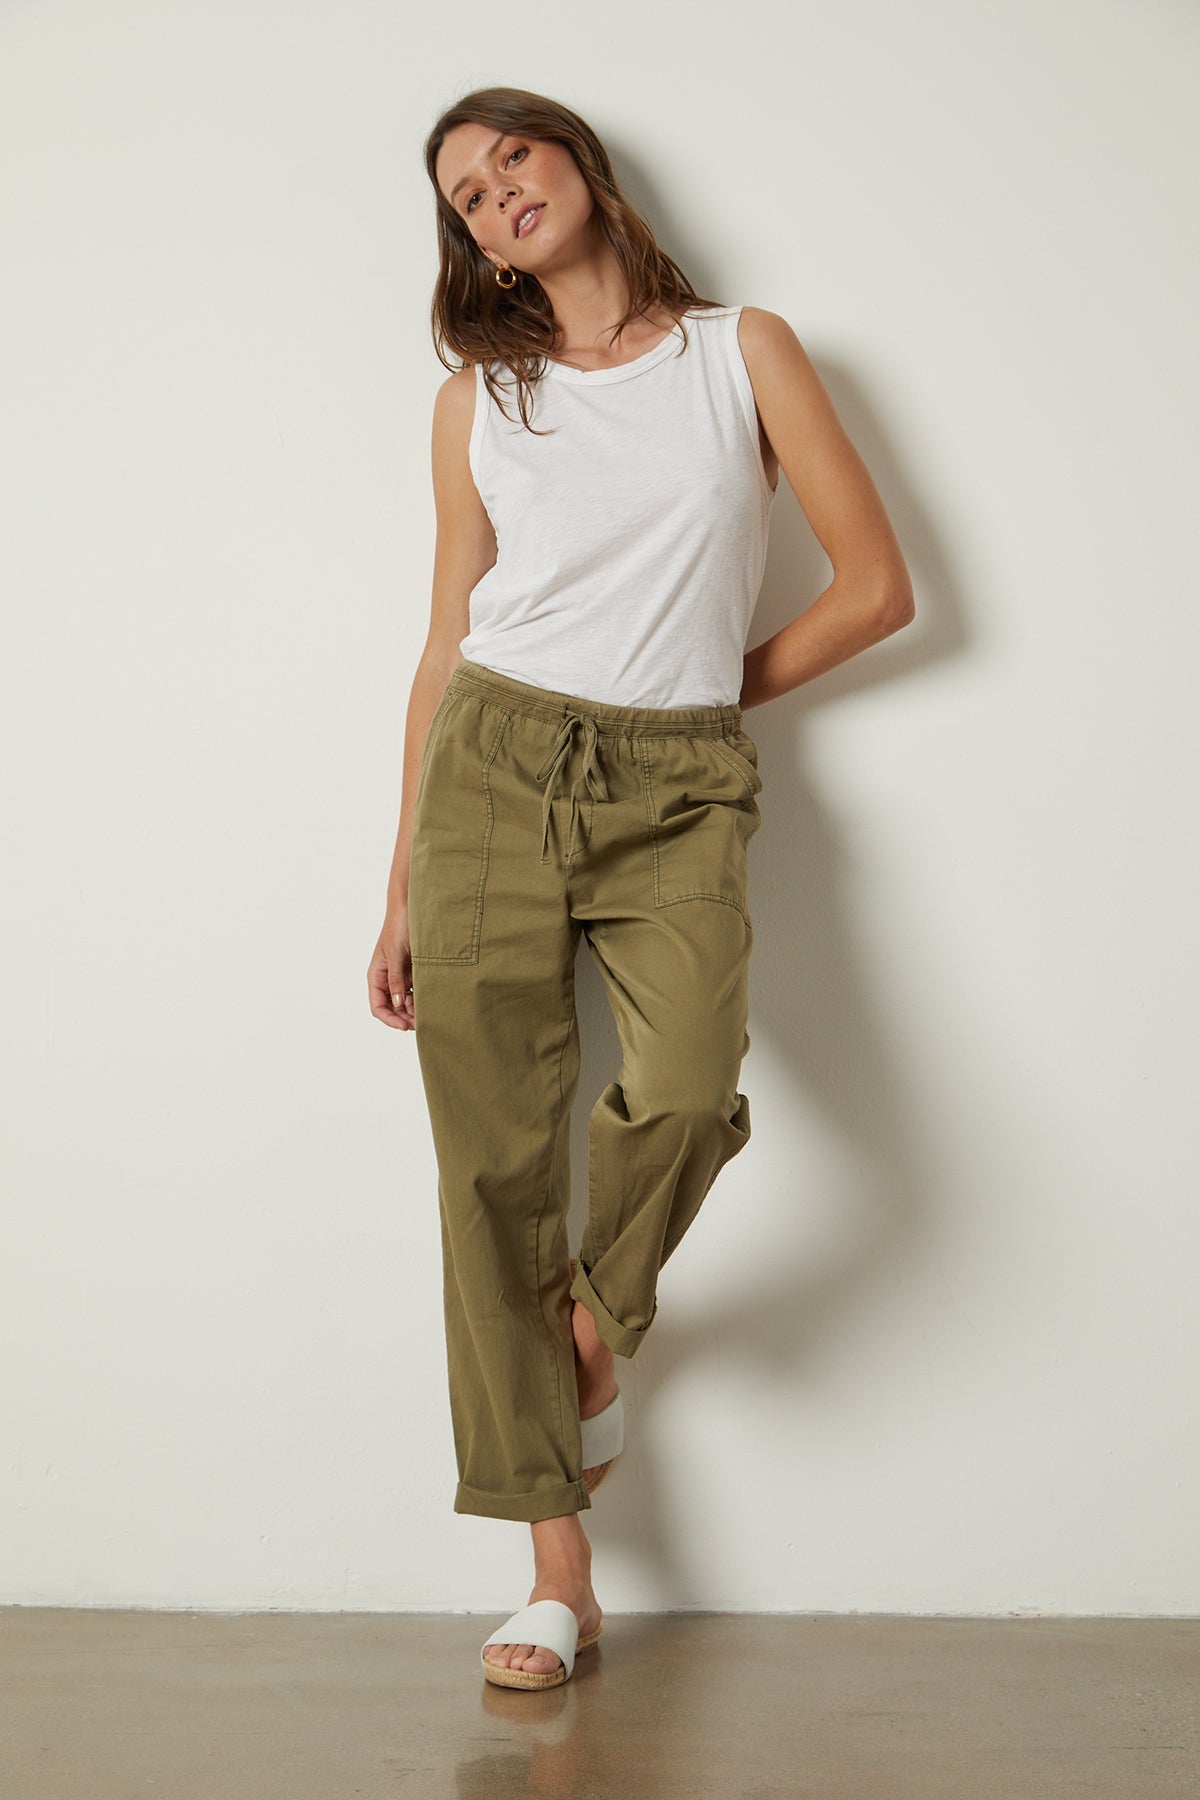   Misty Pant in forest twill with Taurus Tank tucked full length front with white slides 